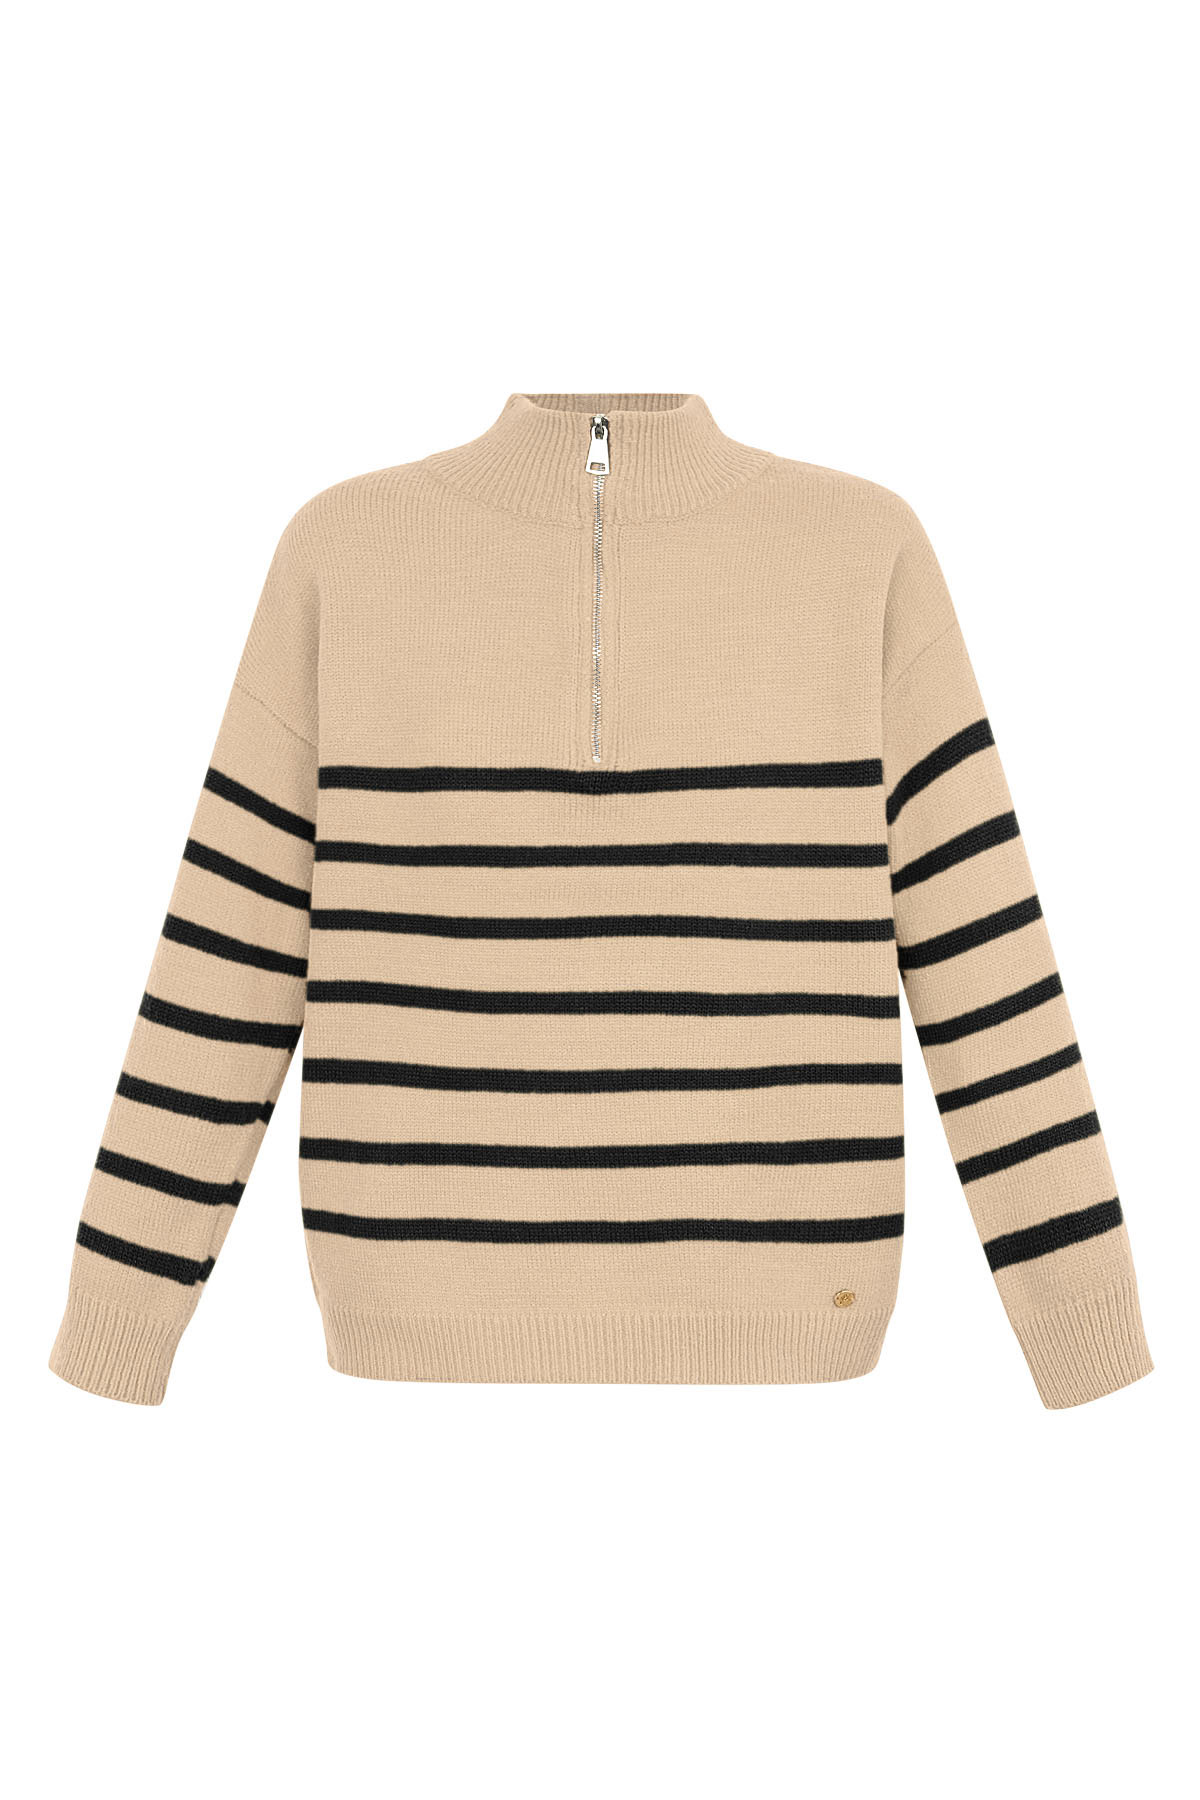 Knitted sweater stripes with zipper - black beige - LXL